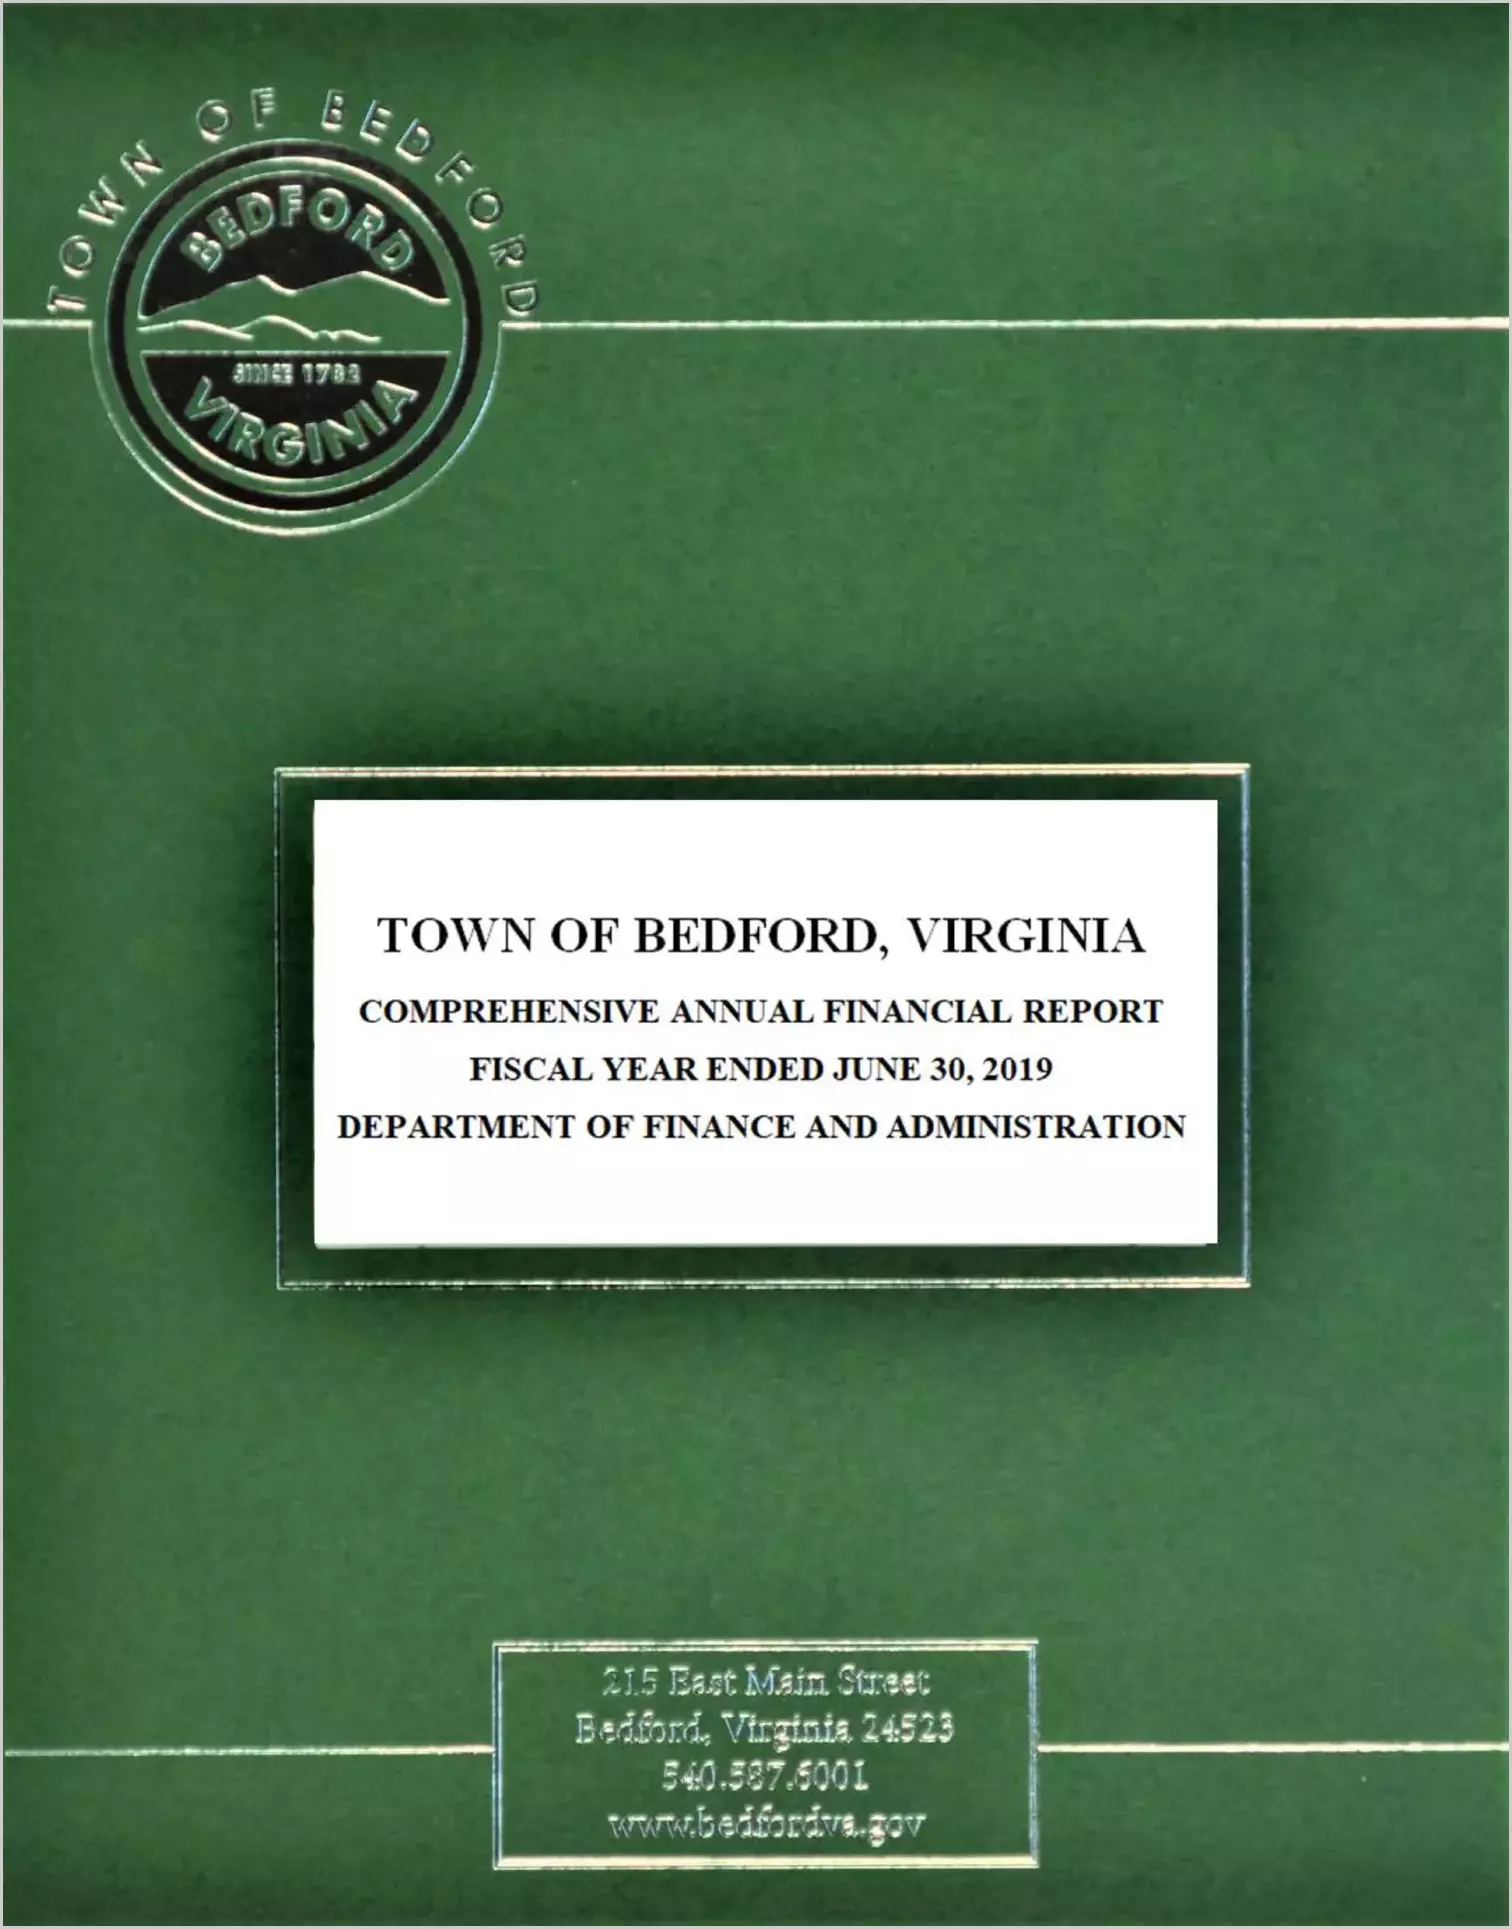 2019 Annual Financial Report for Town of Bedford